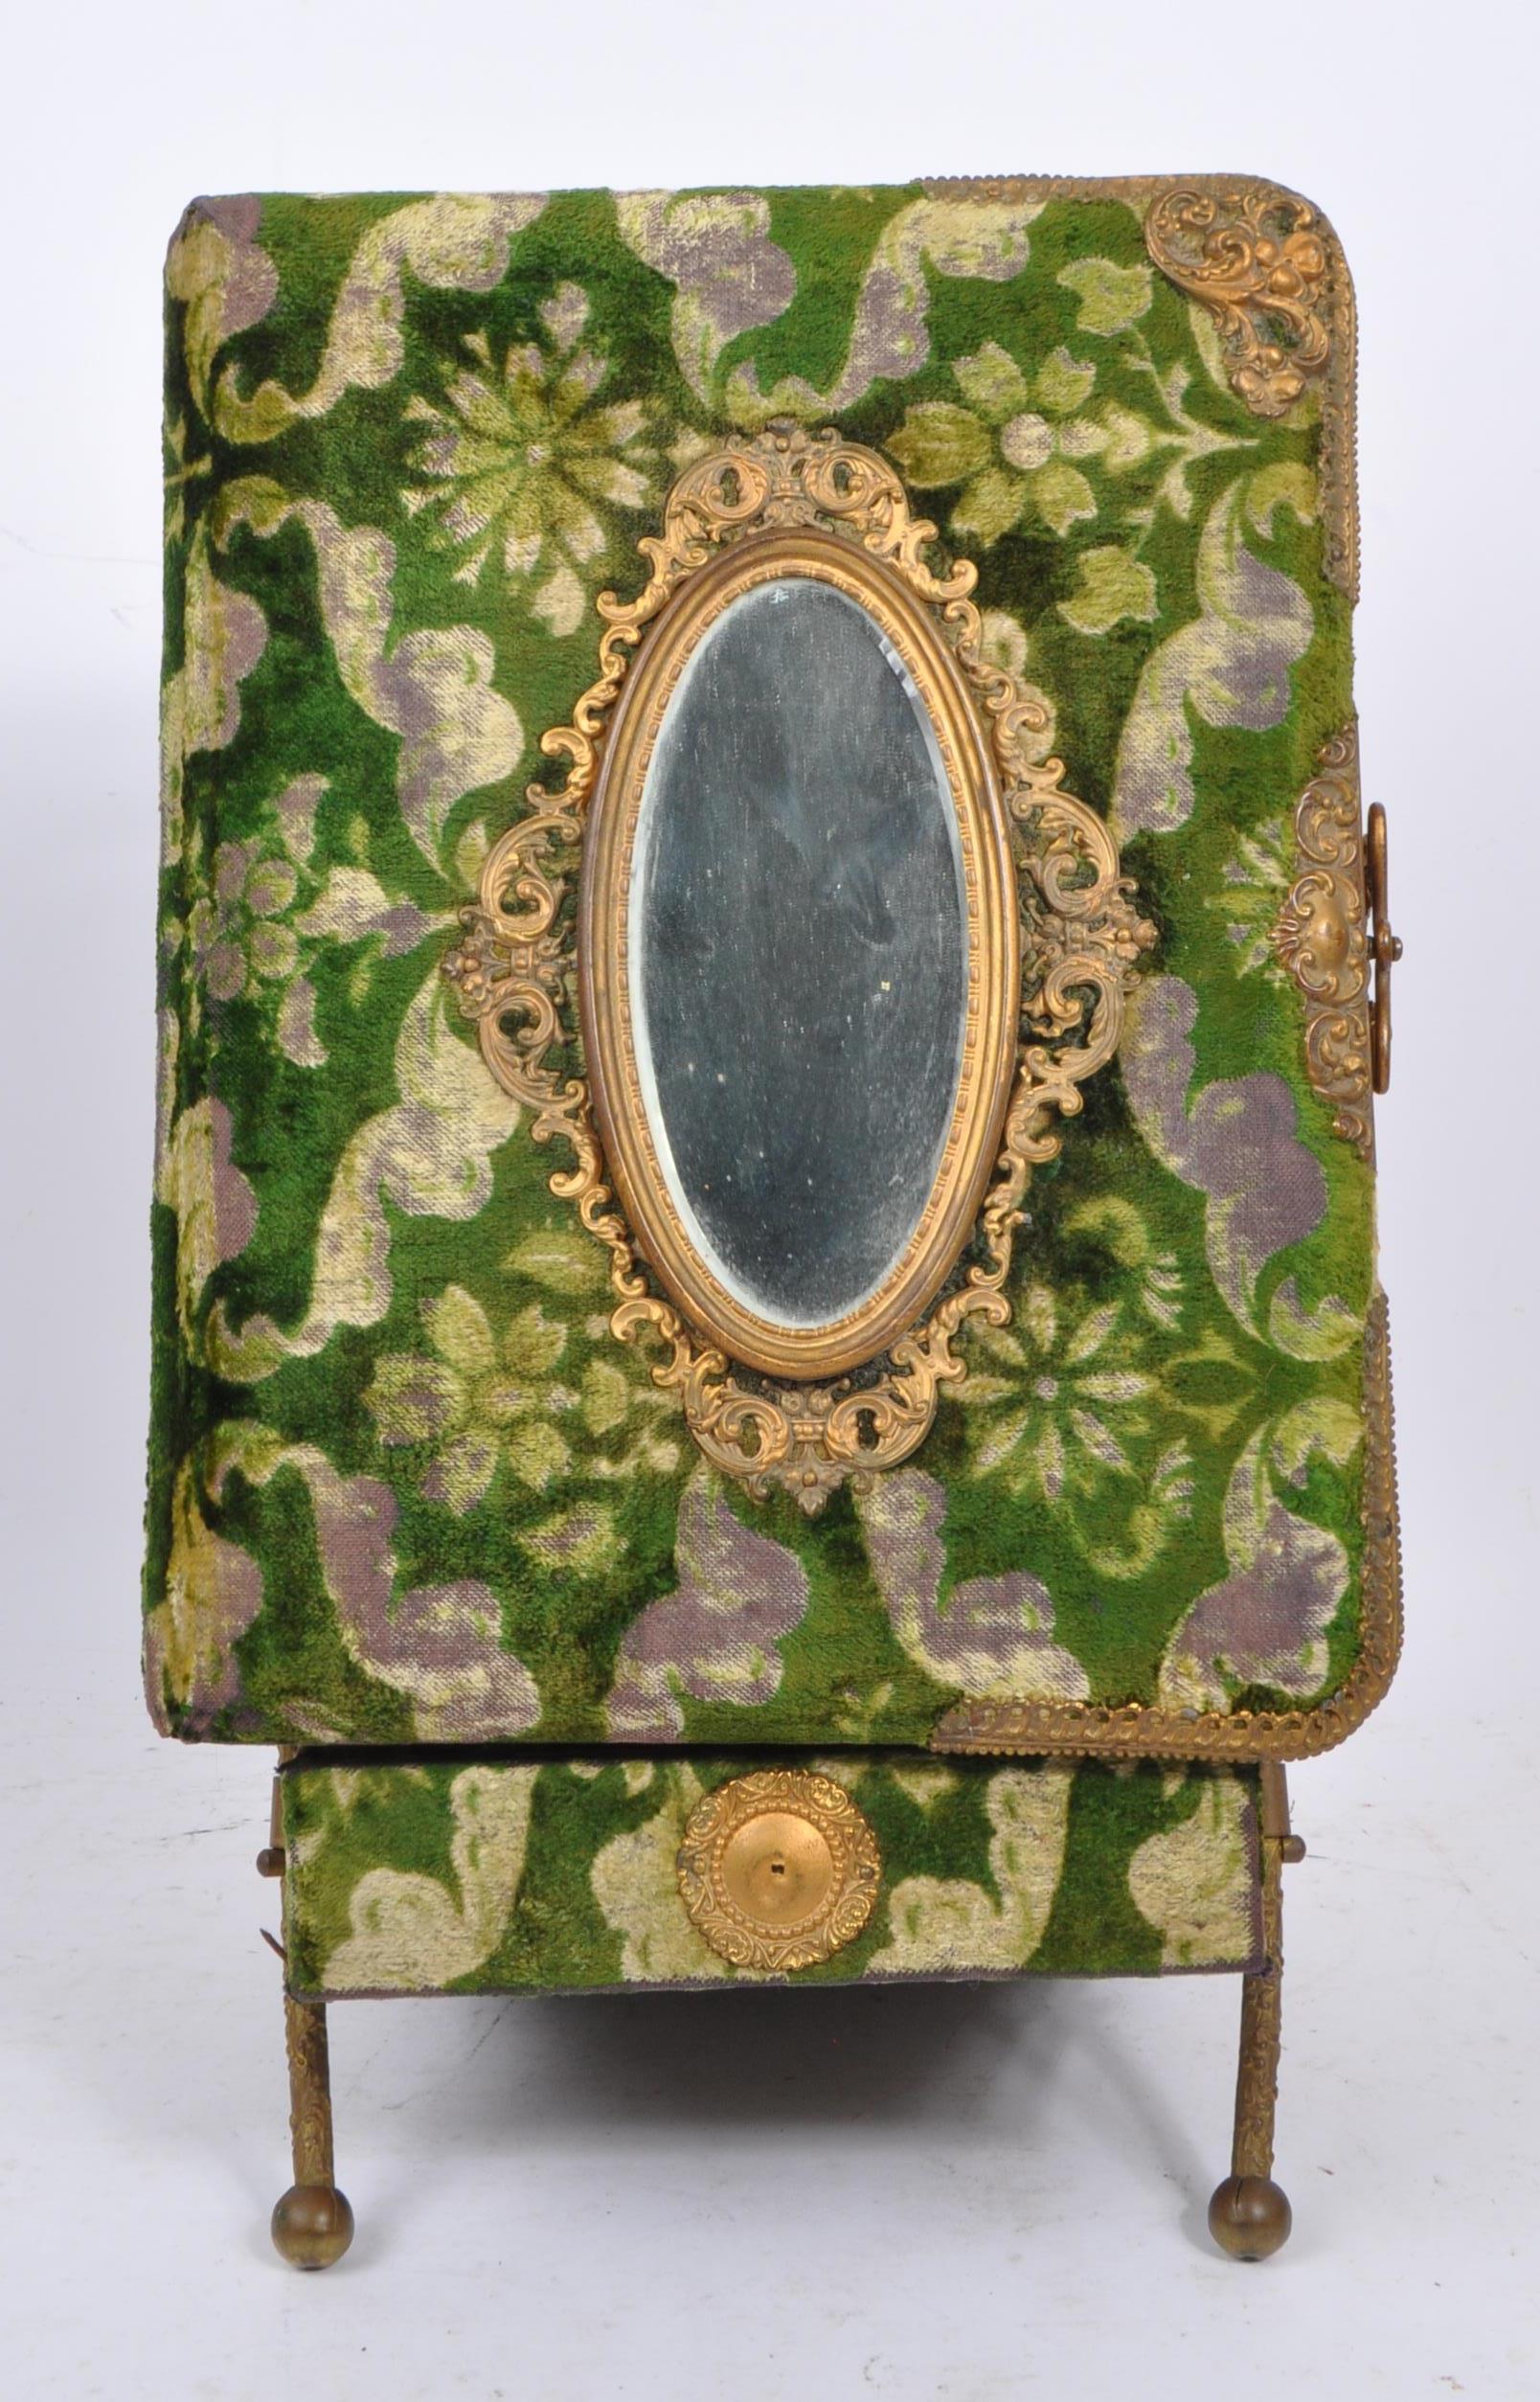 VICTORIAN VELVET AND REPOUSSE BRASS CABINET PHOTO ALBUM - Image 2 of 9